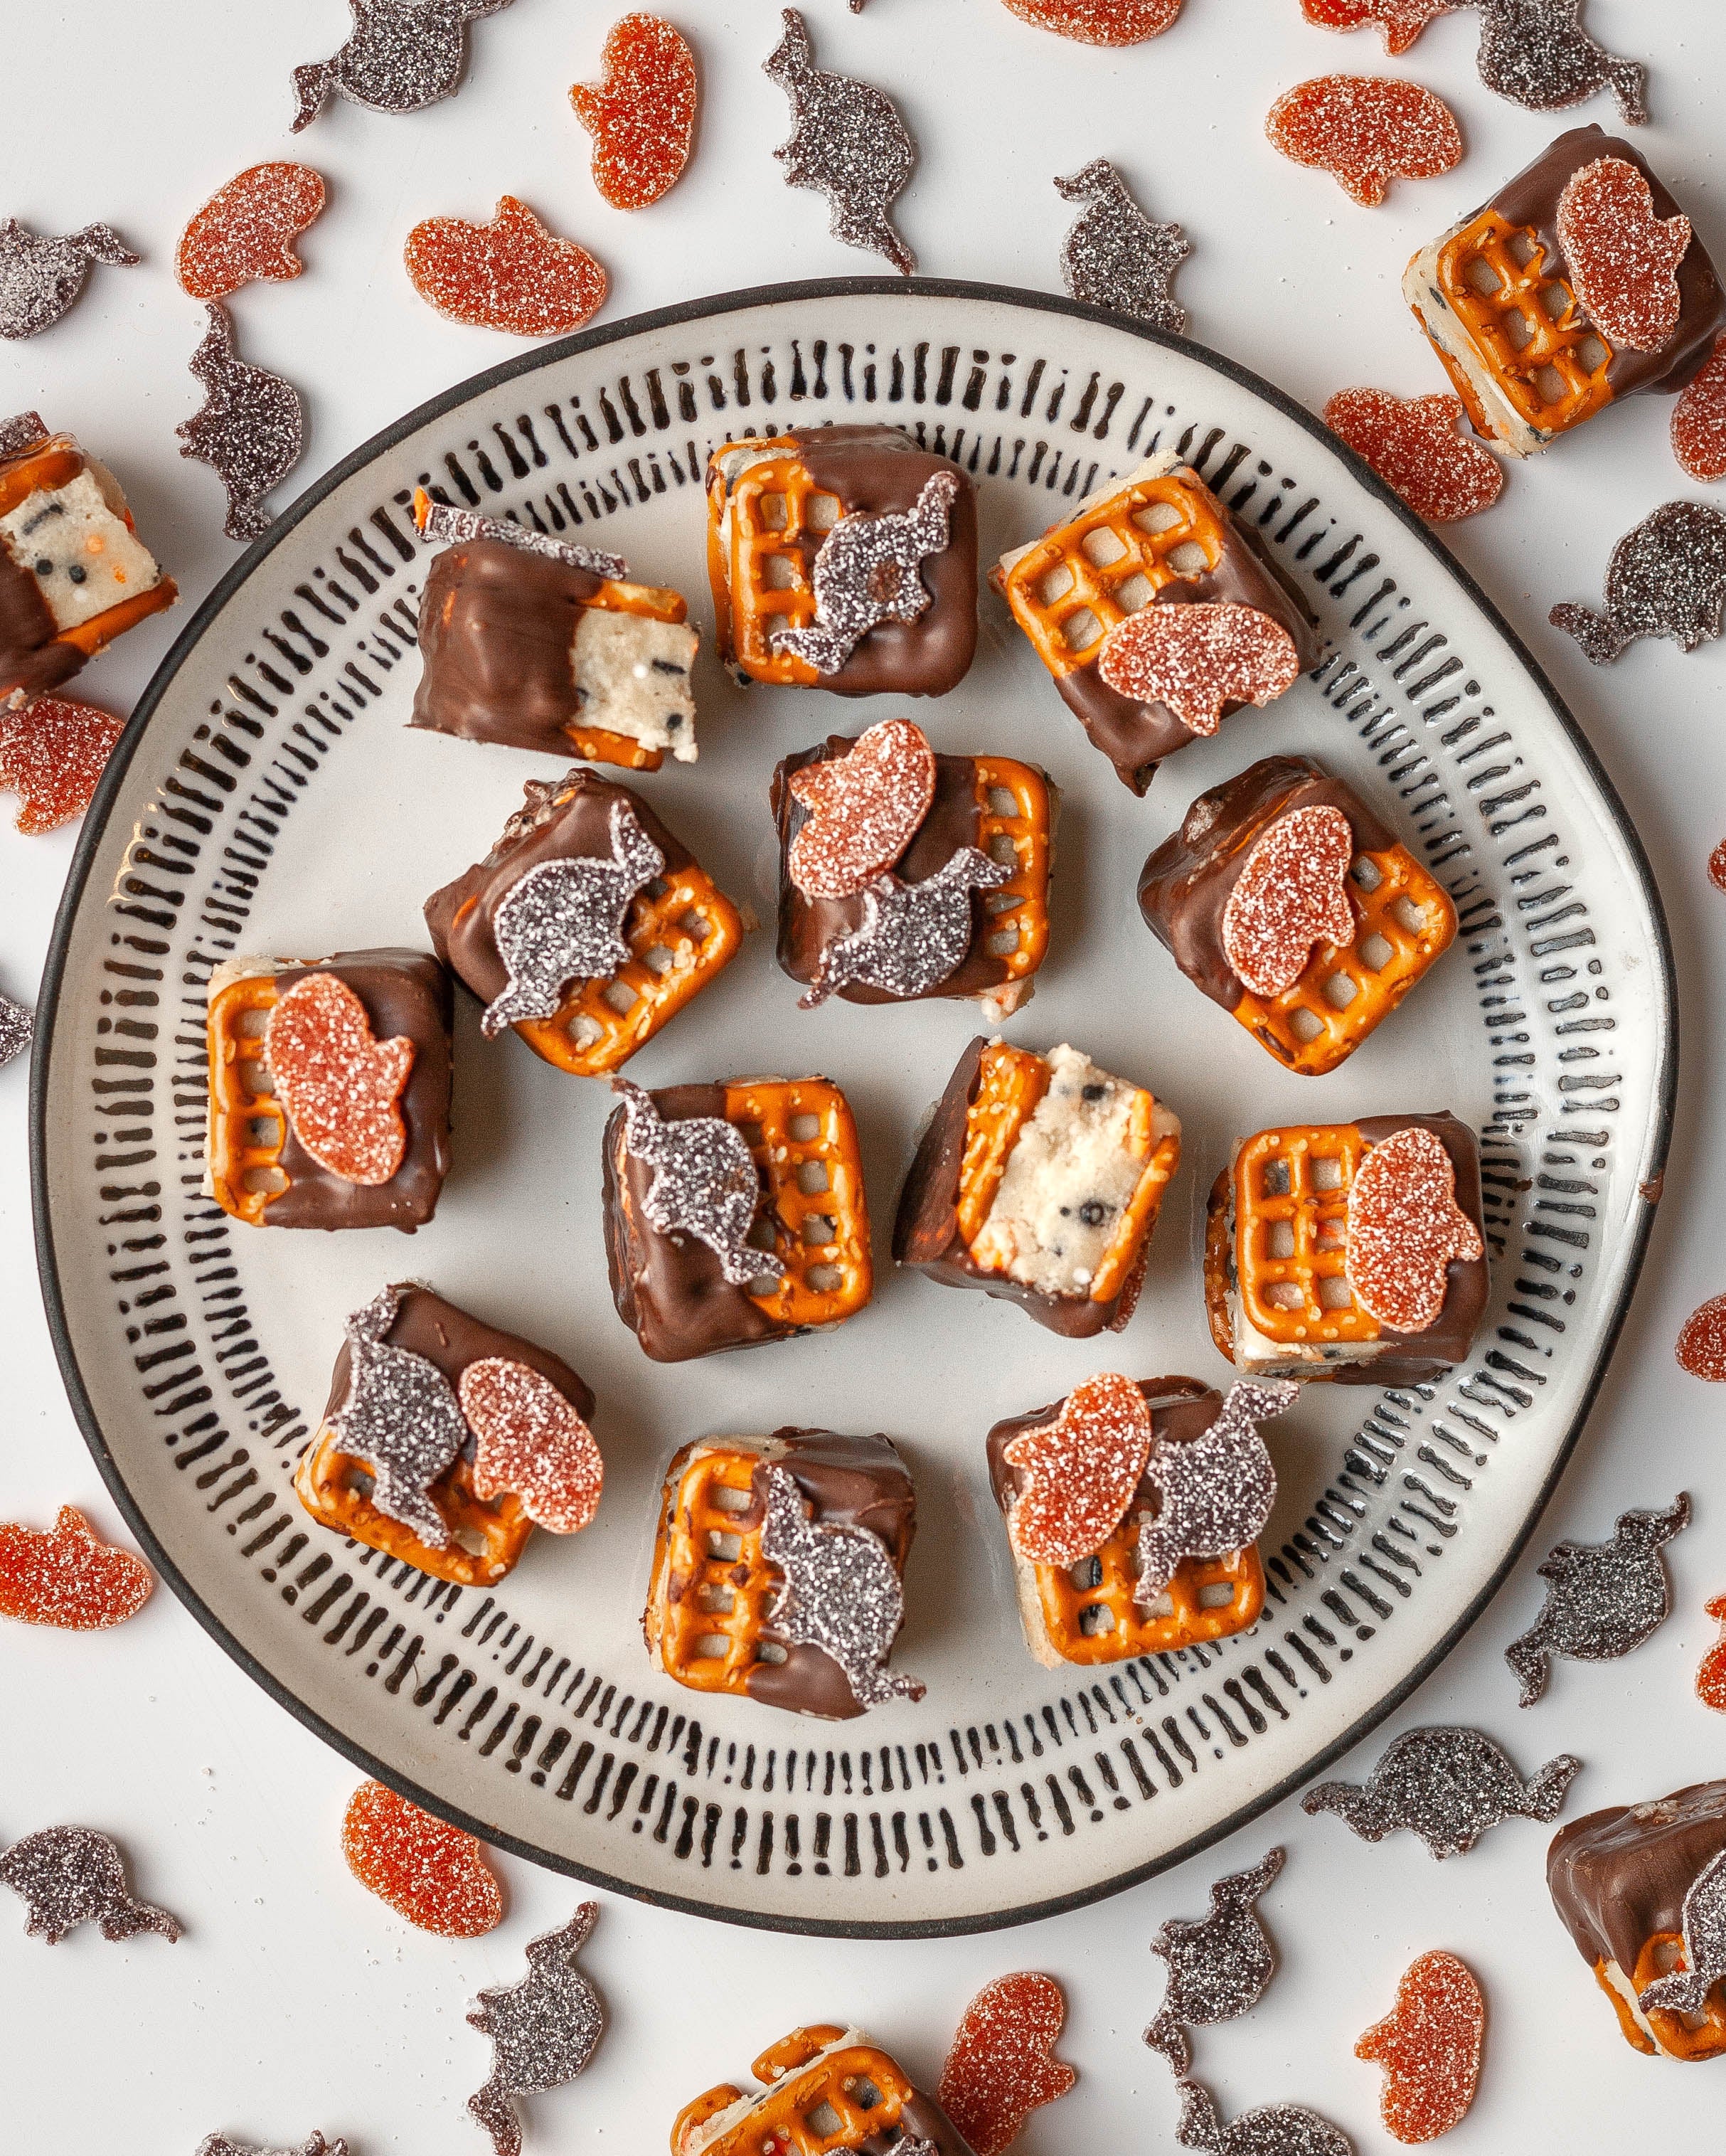 Sour Punch Pretzel Sandwiches filled with edible cookie dough and topped with Bats & Pumpkins Halloween Candy